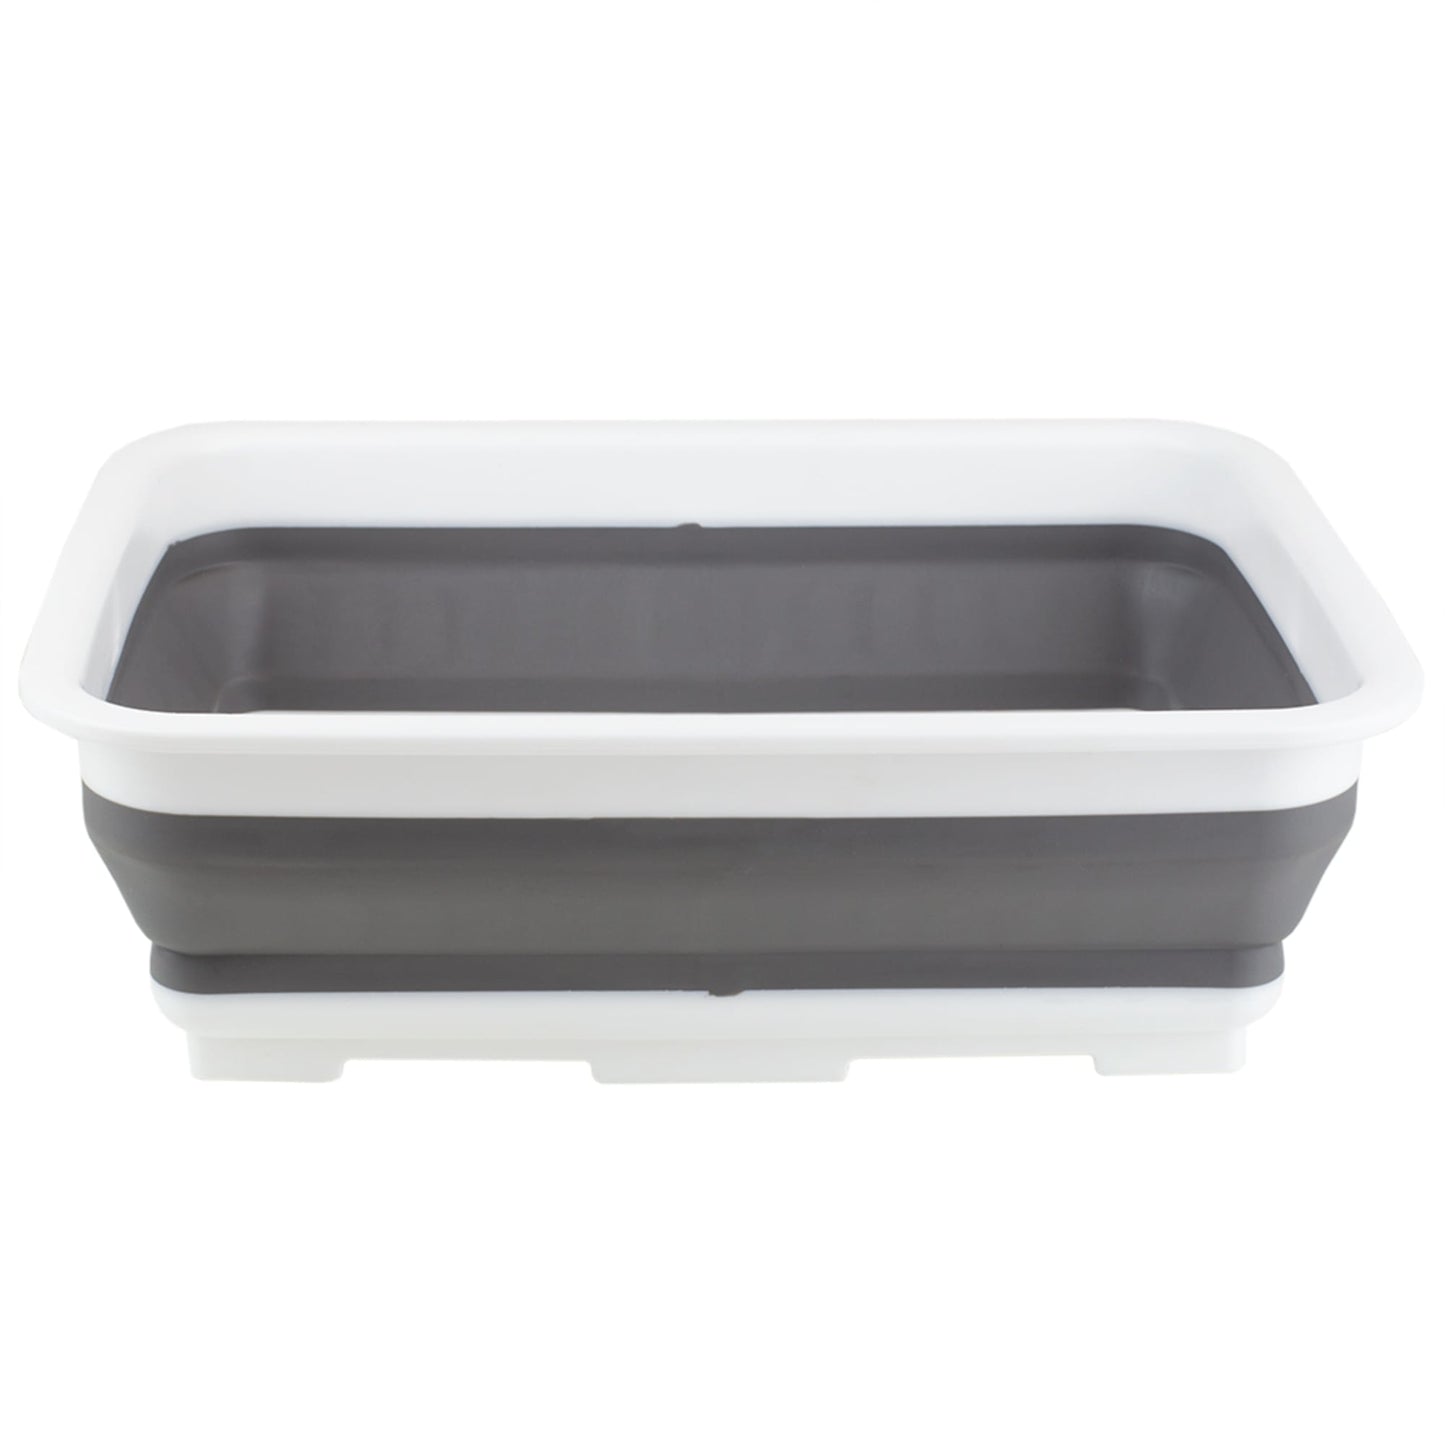 Collapsible Silicone and Plastic Multi-Purpose Storage Washing Basin, Grey